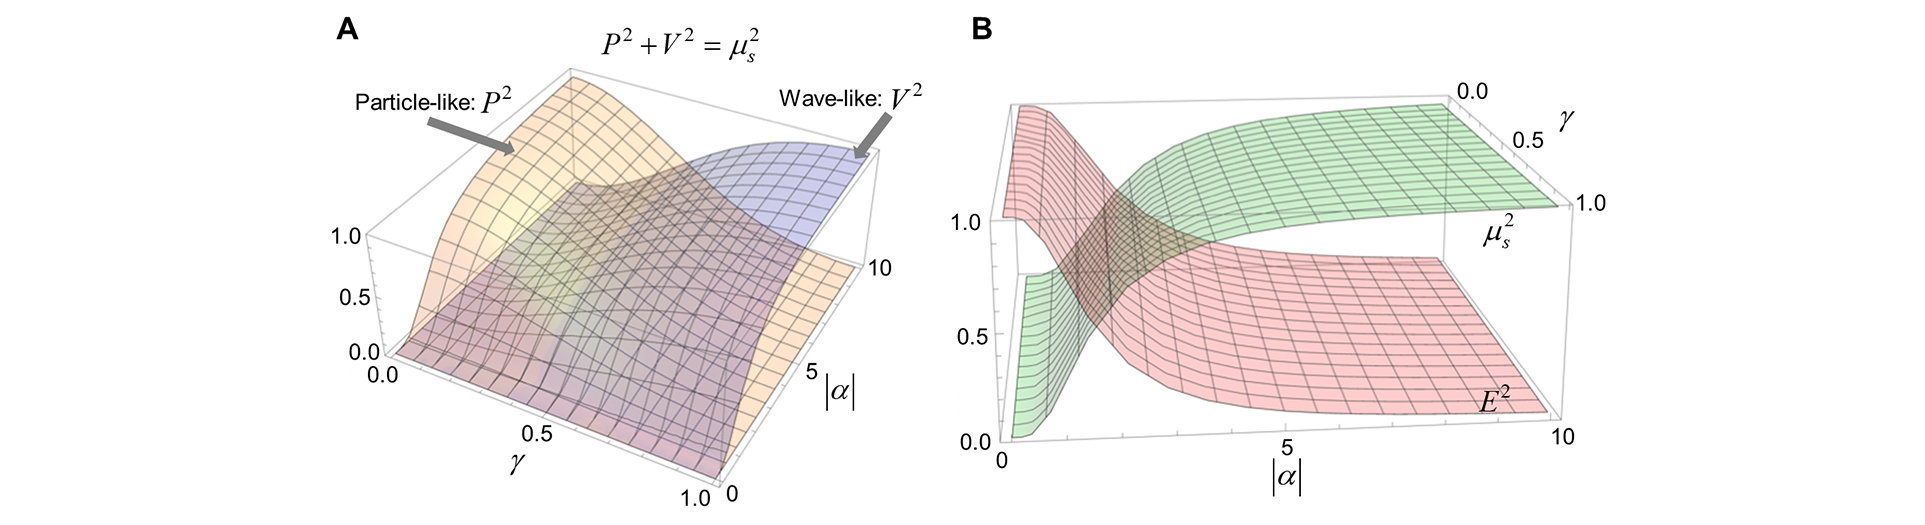 Experimental confirmation of wave-particle duality